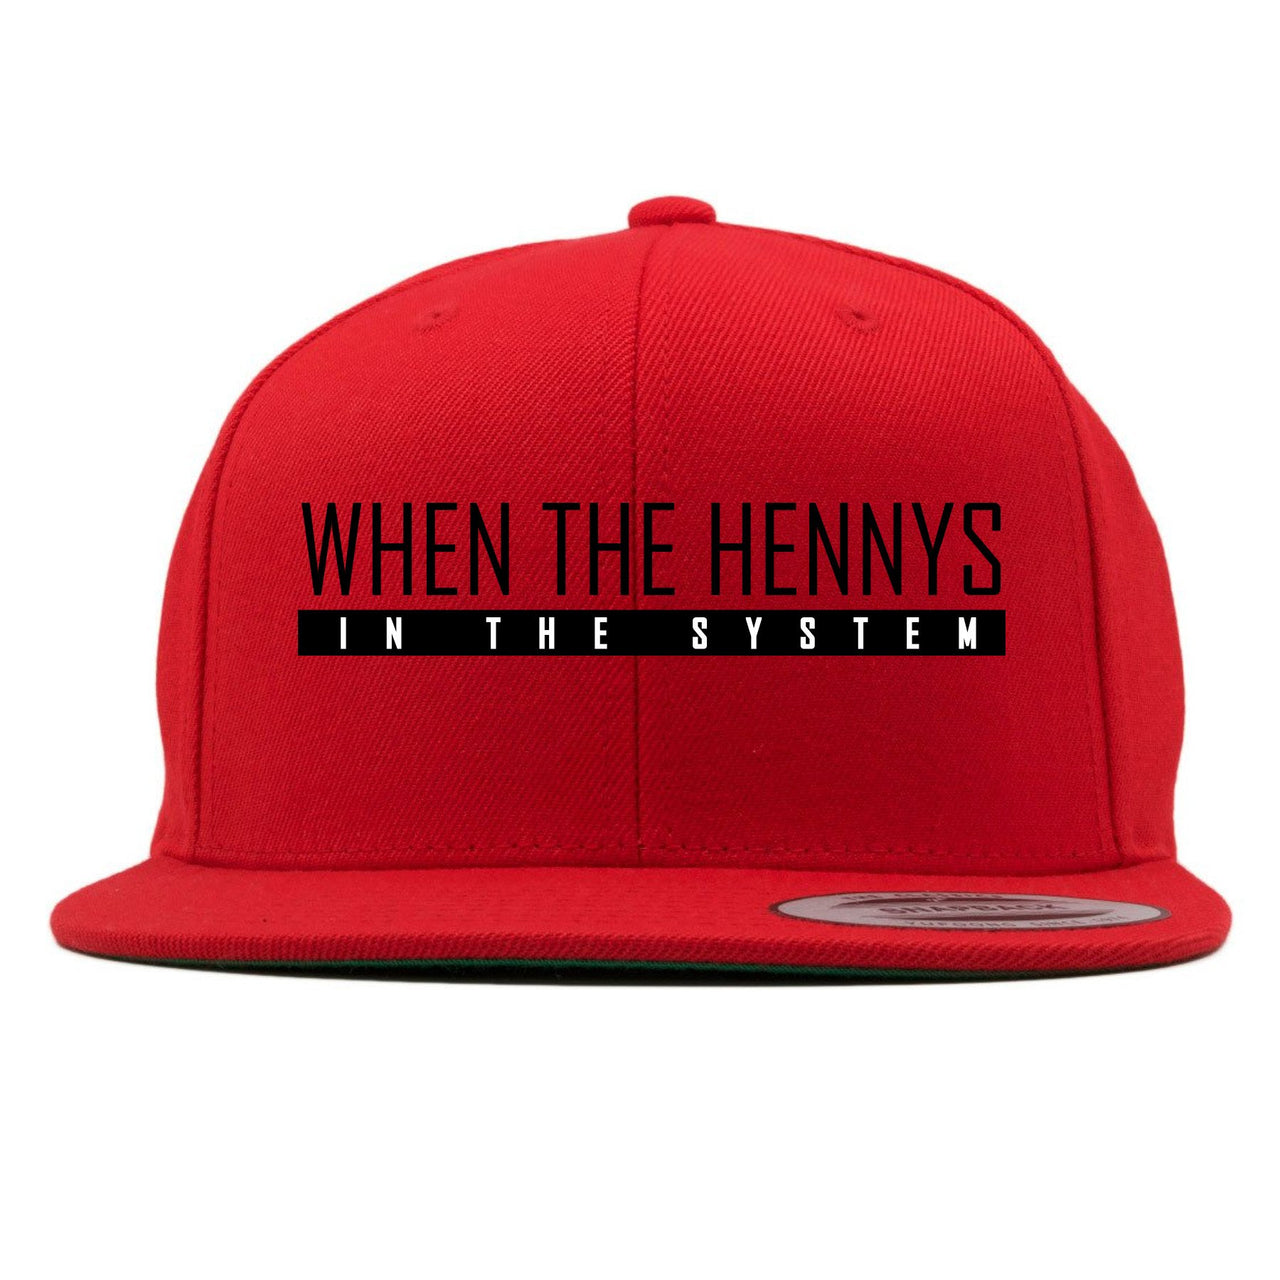 Bred 2019 4s Snapback | When the Hennys, Red